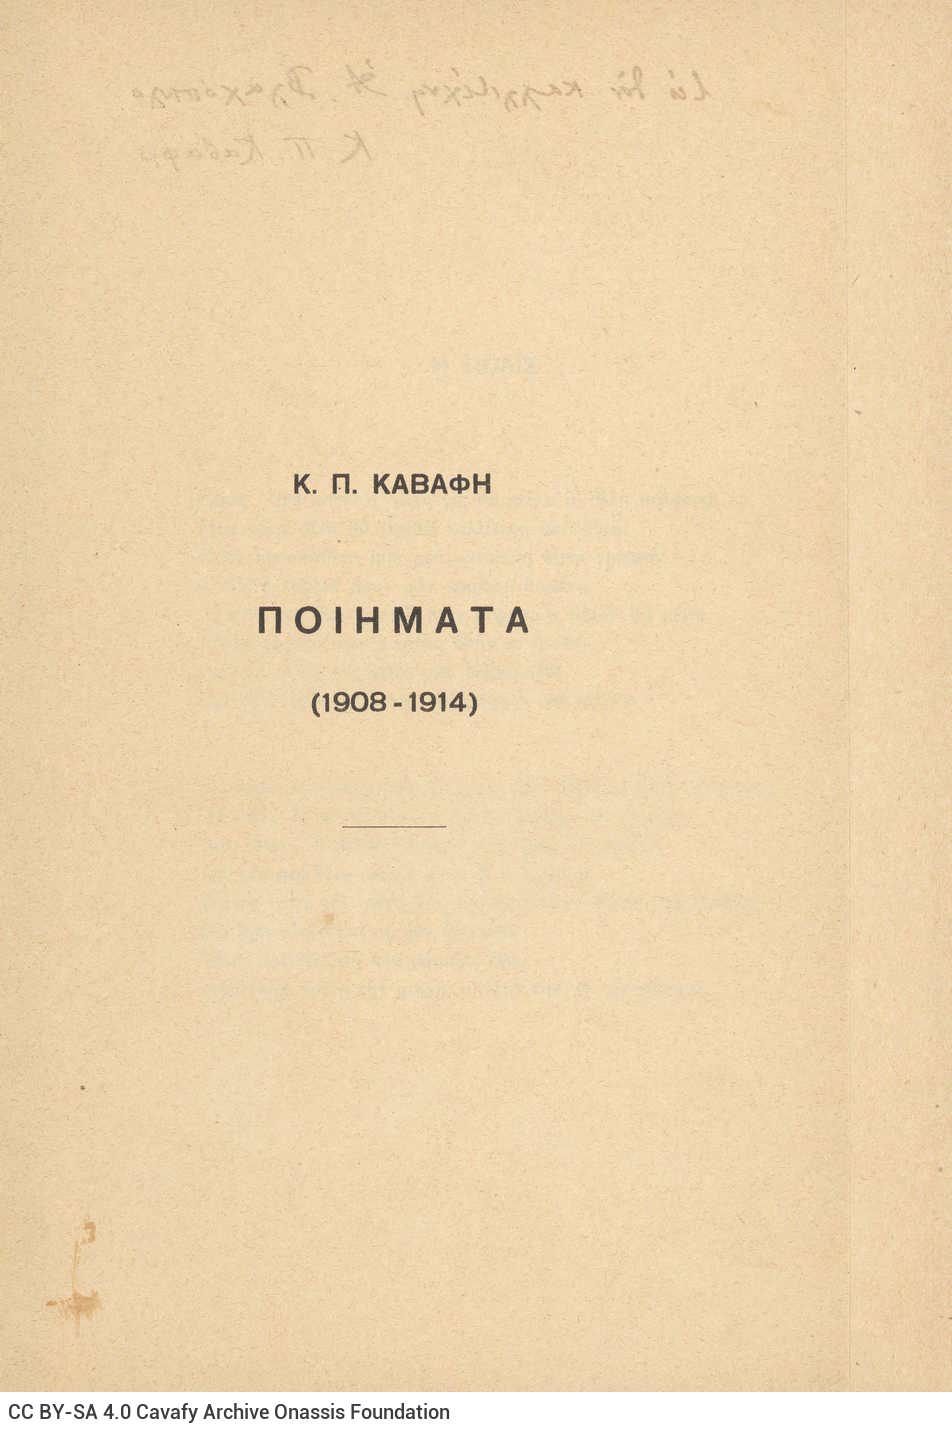 Cavafy's poetry collection (Γ4). It consists of bound printed broadsheets of the Kasimatis & Ionas printing house, of the 19